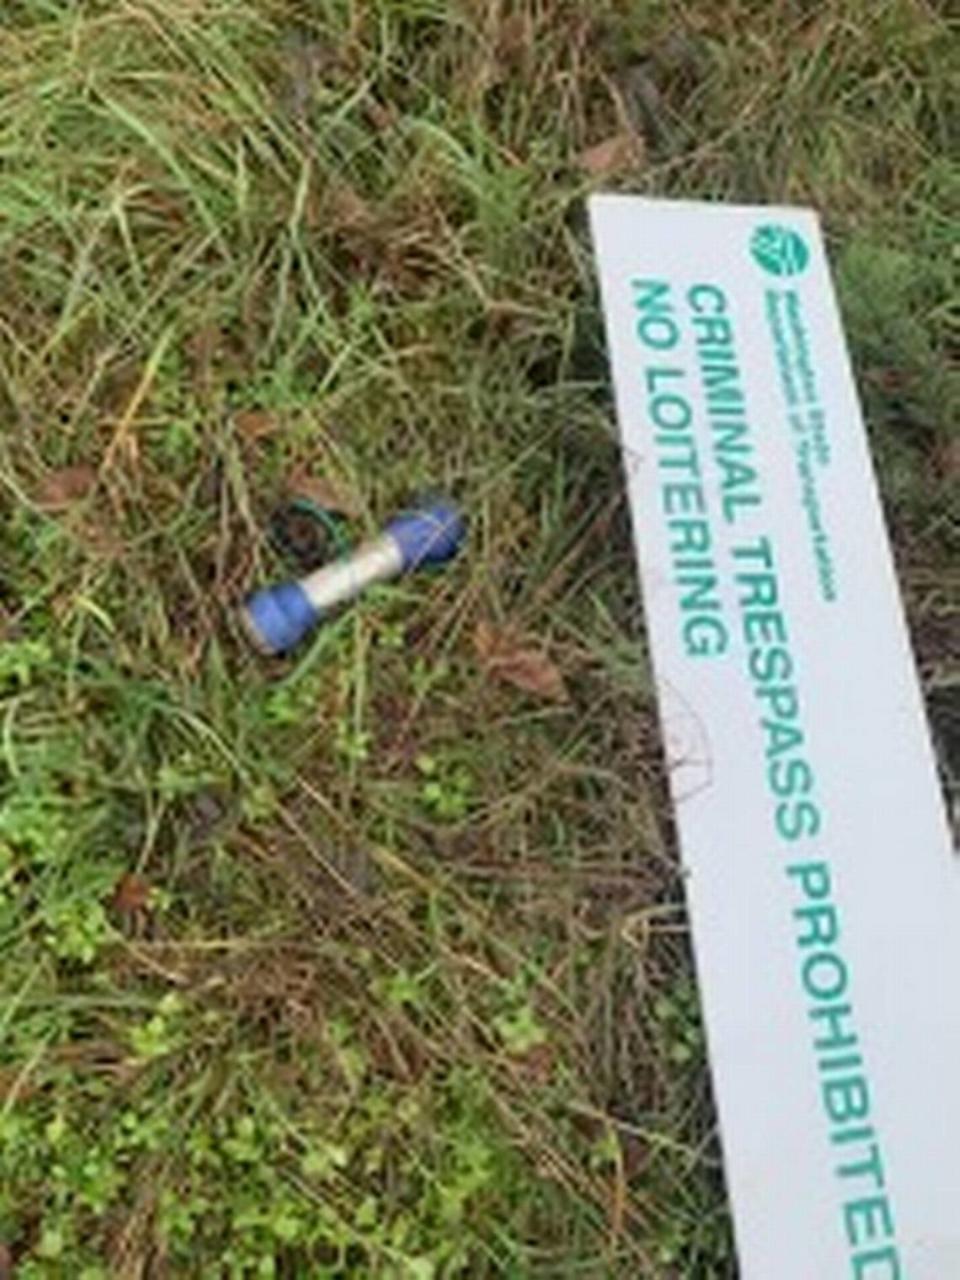 The pipe bomb that was found Monday morning in Tumwater. Washington State Patrol/Courtesy